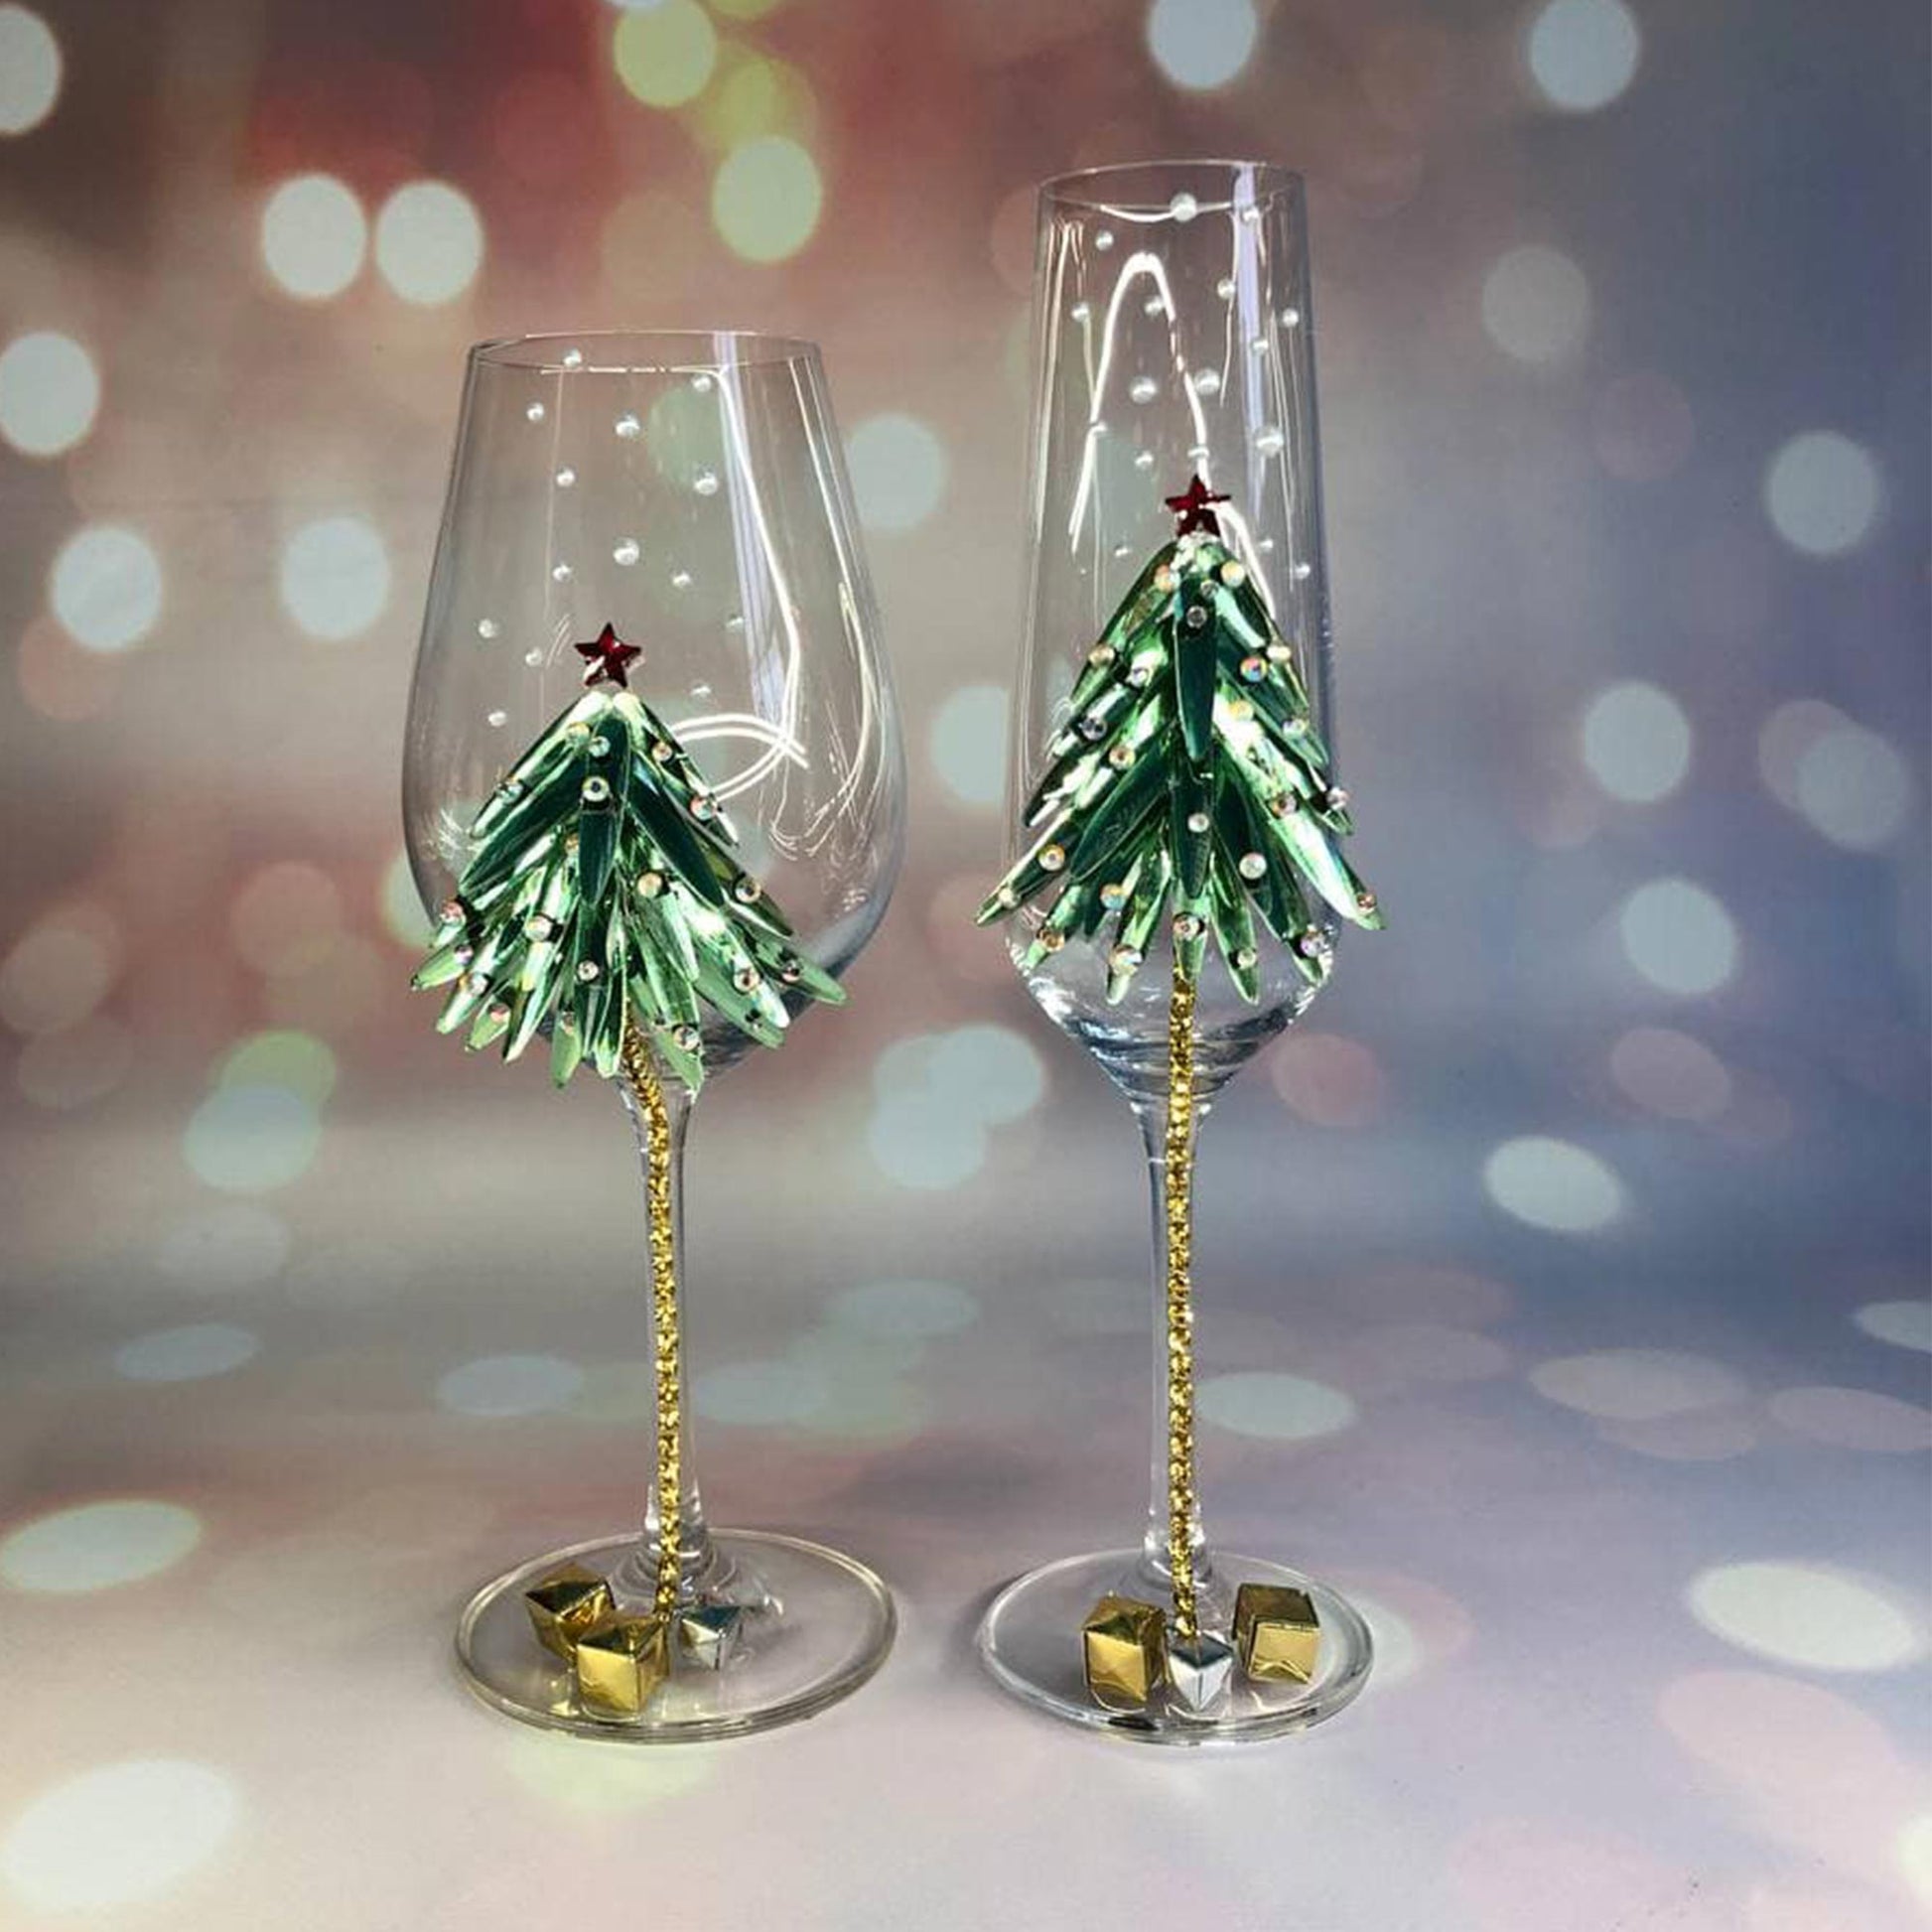 Gnome Jeweled Stemmed Wine Glass, Set of 2 - The French Table